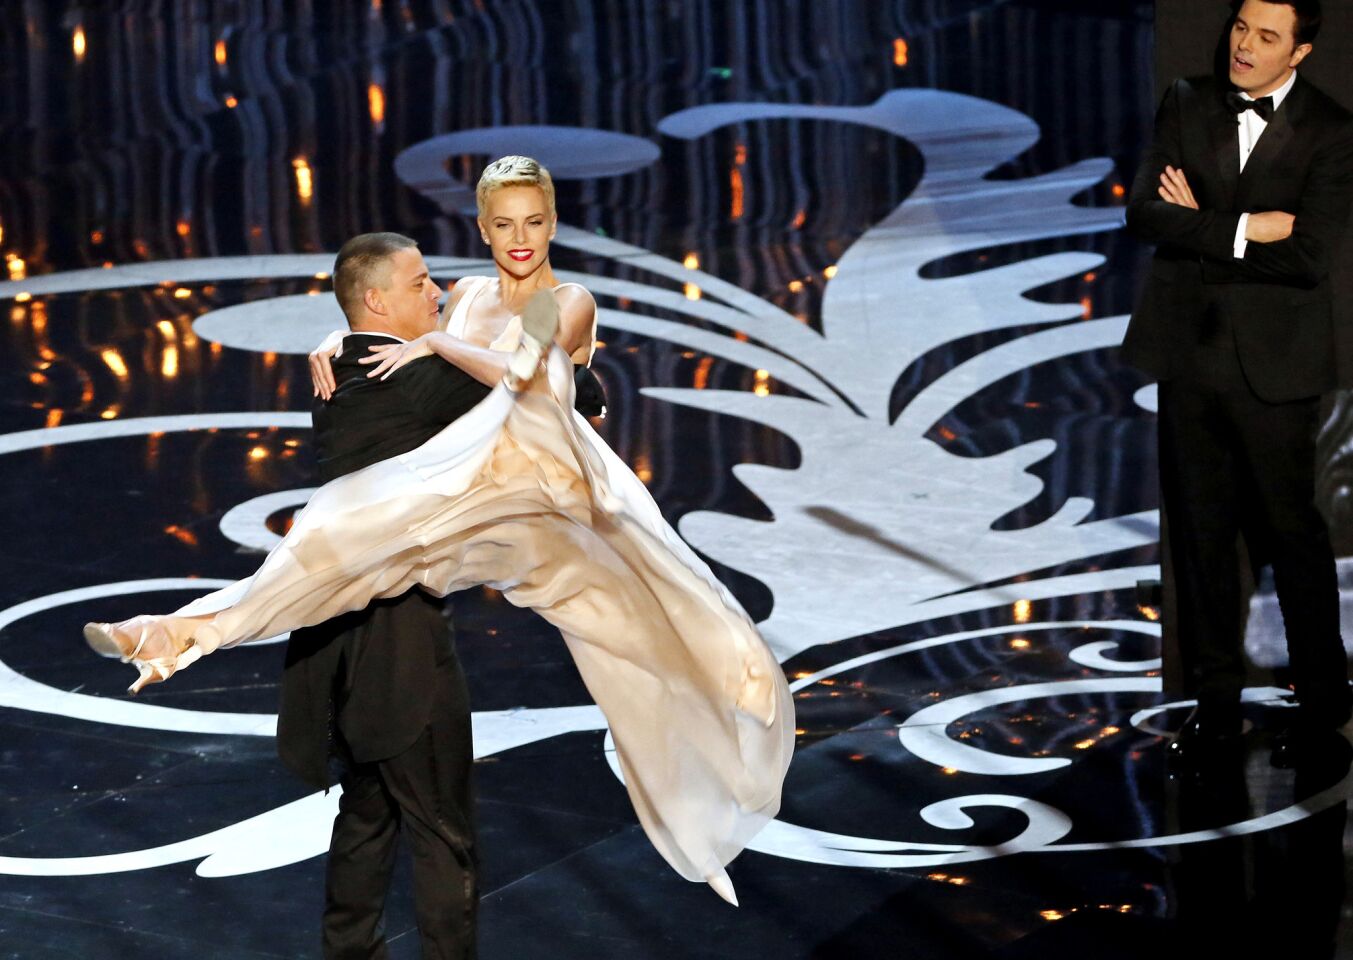 Channing Tatum dances with actress Charlize Theron as host Seth MacFarlane looks on during the 85th Academy Awards at the Dolby Theatre.